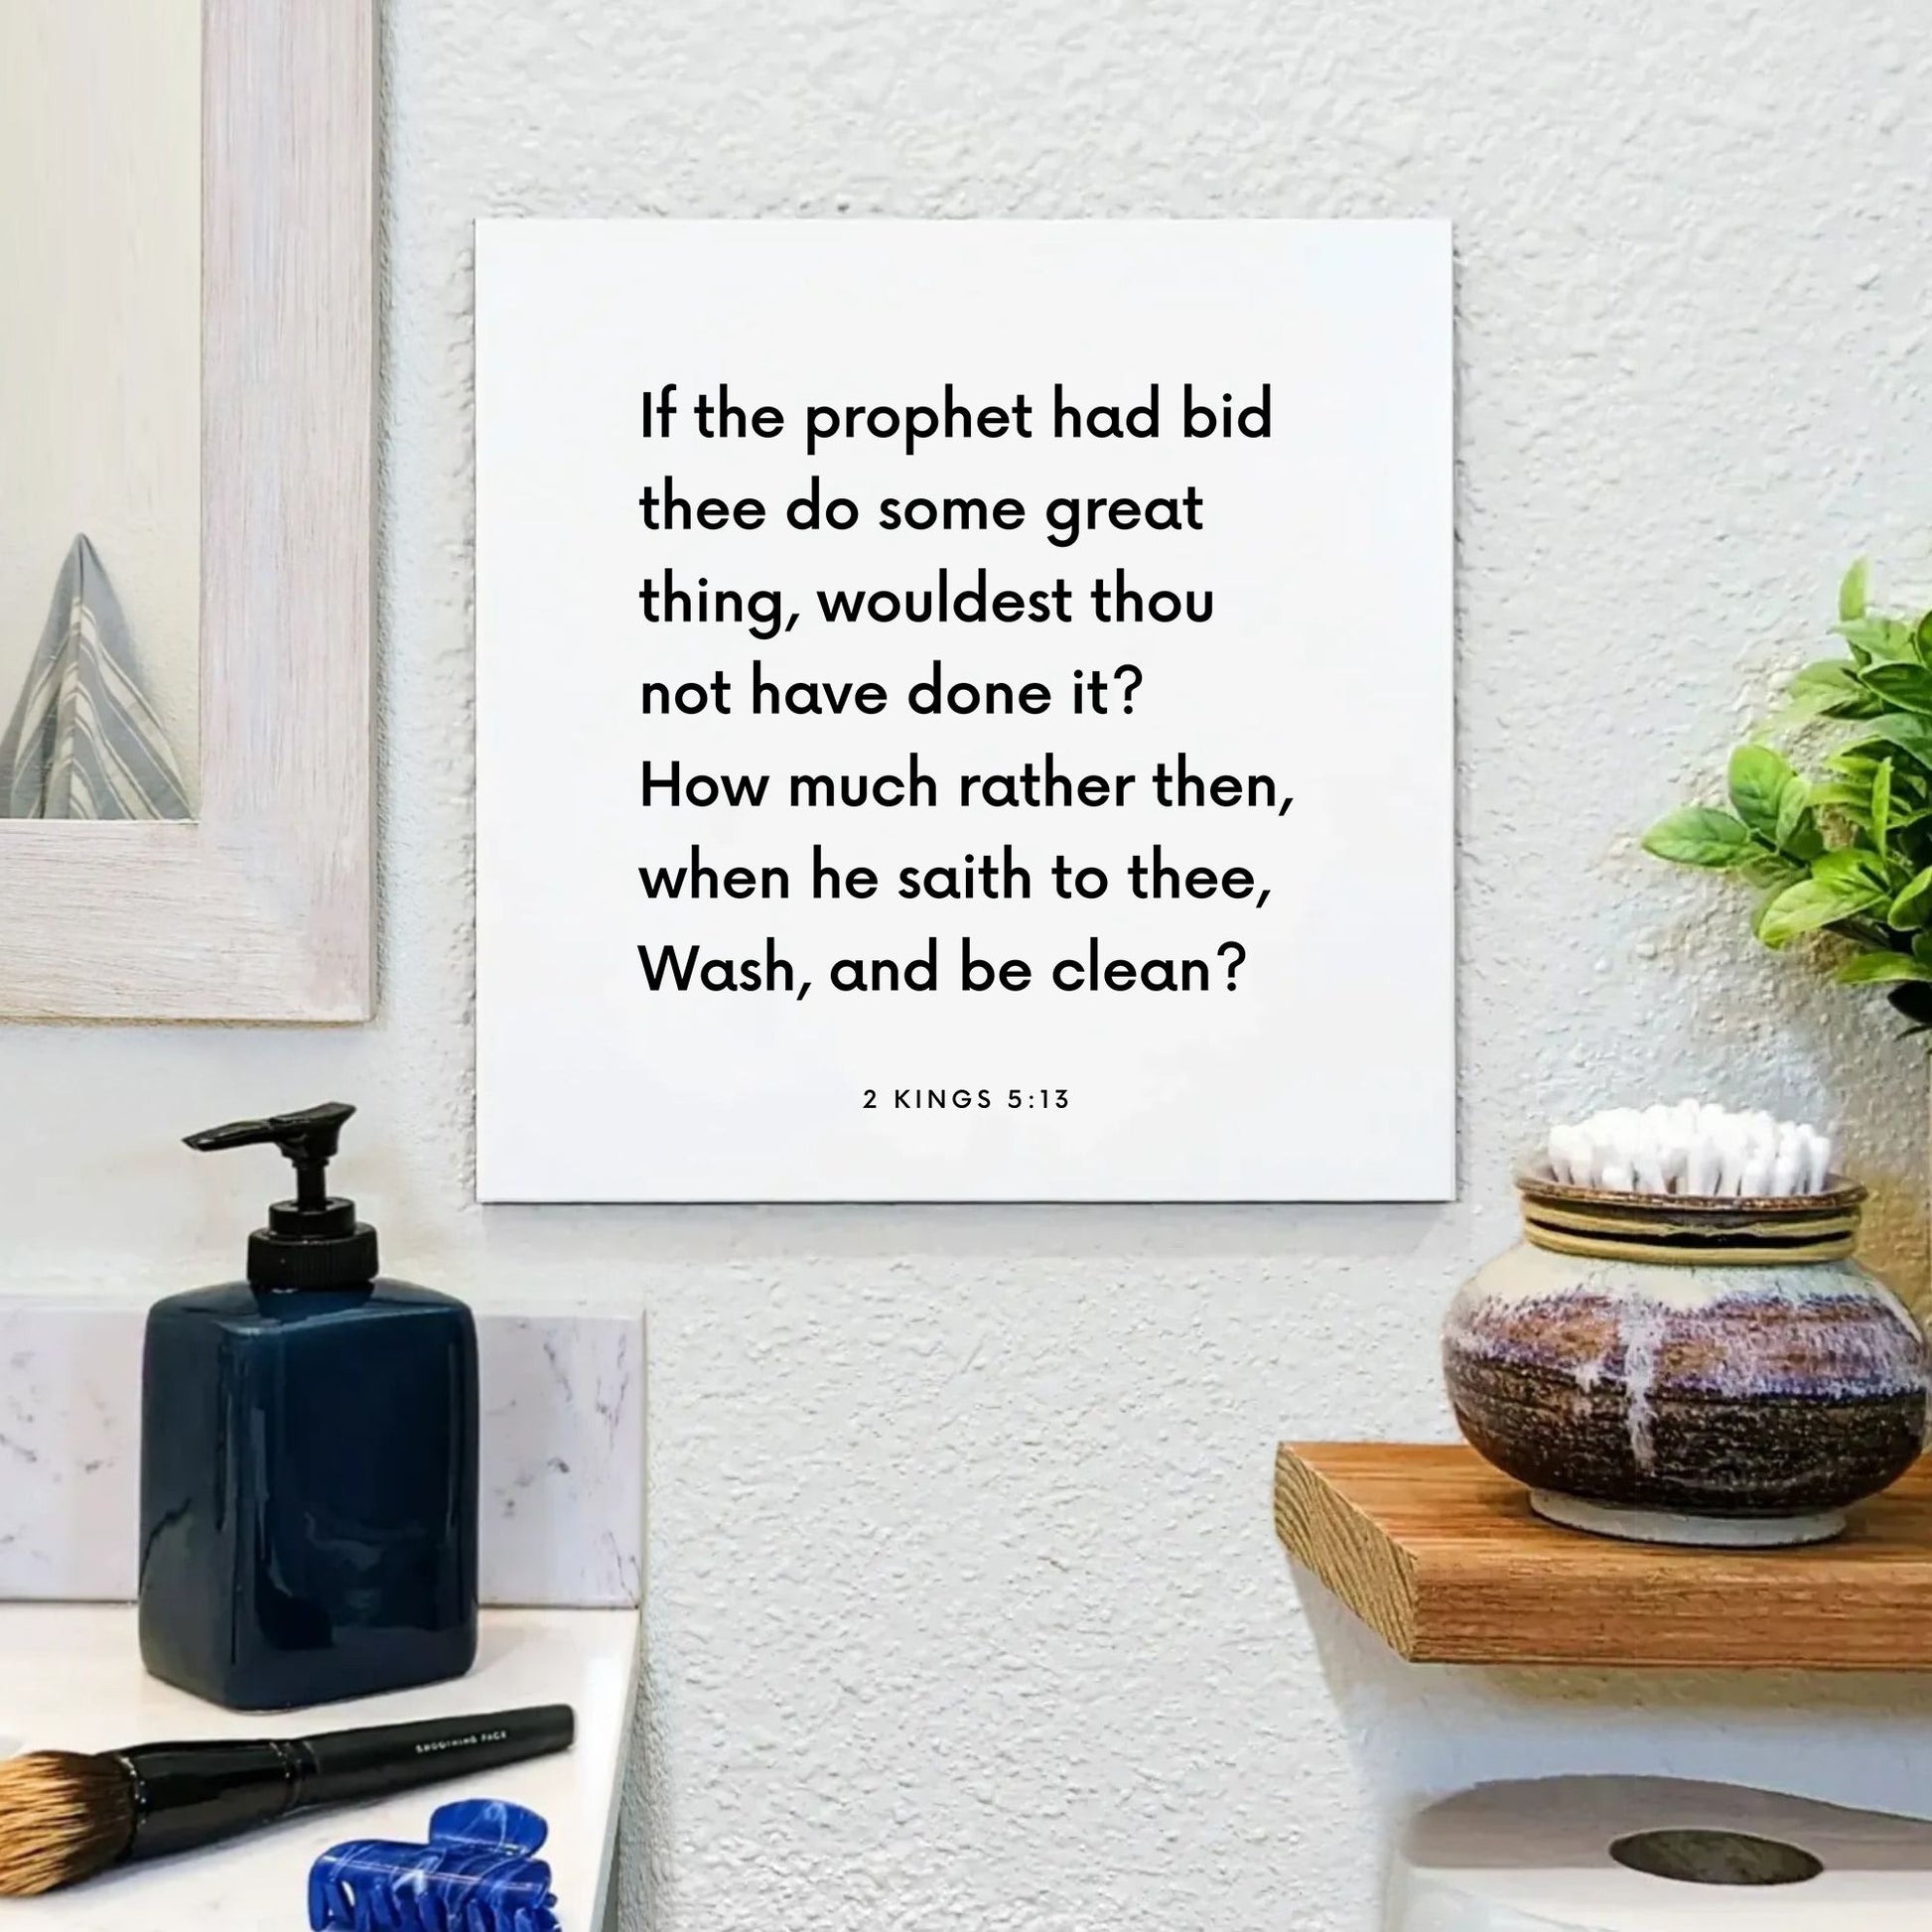 Bathroom mouting of the scripture tile for 2 Kings 5:13 - "If the prophet had bid thee do some great thing"